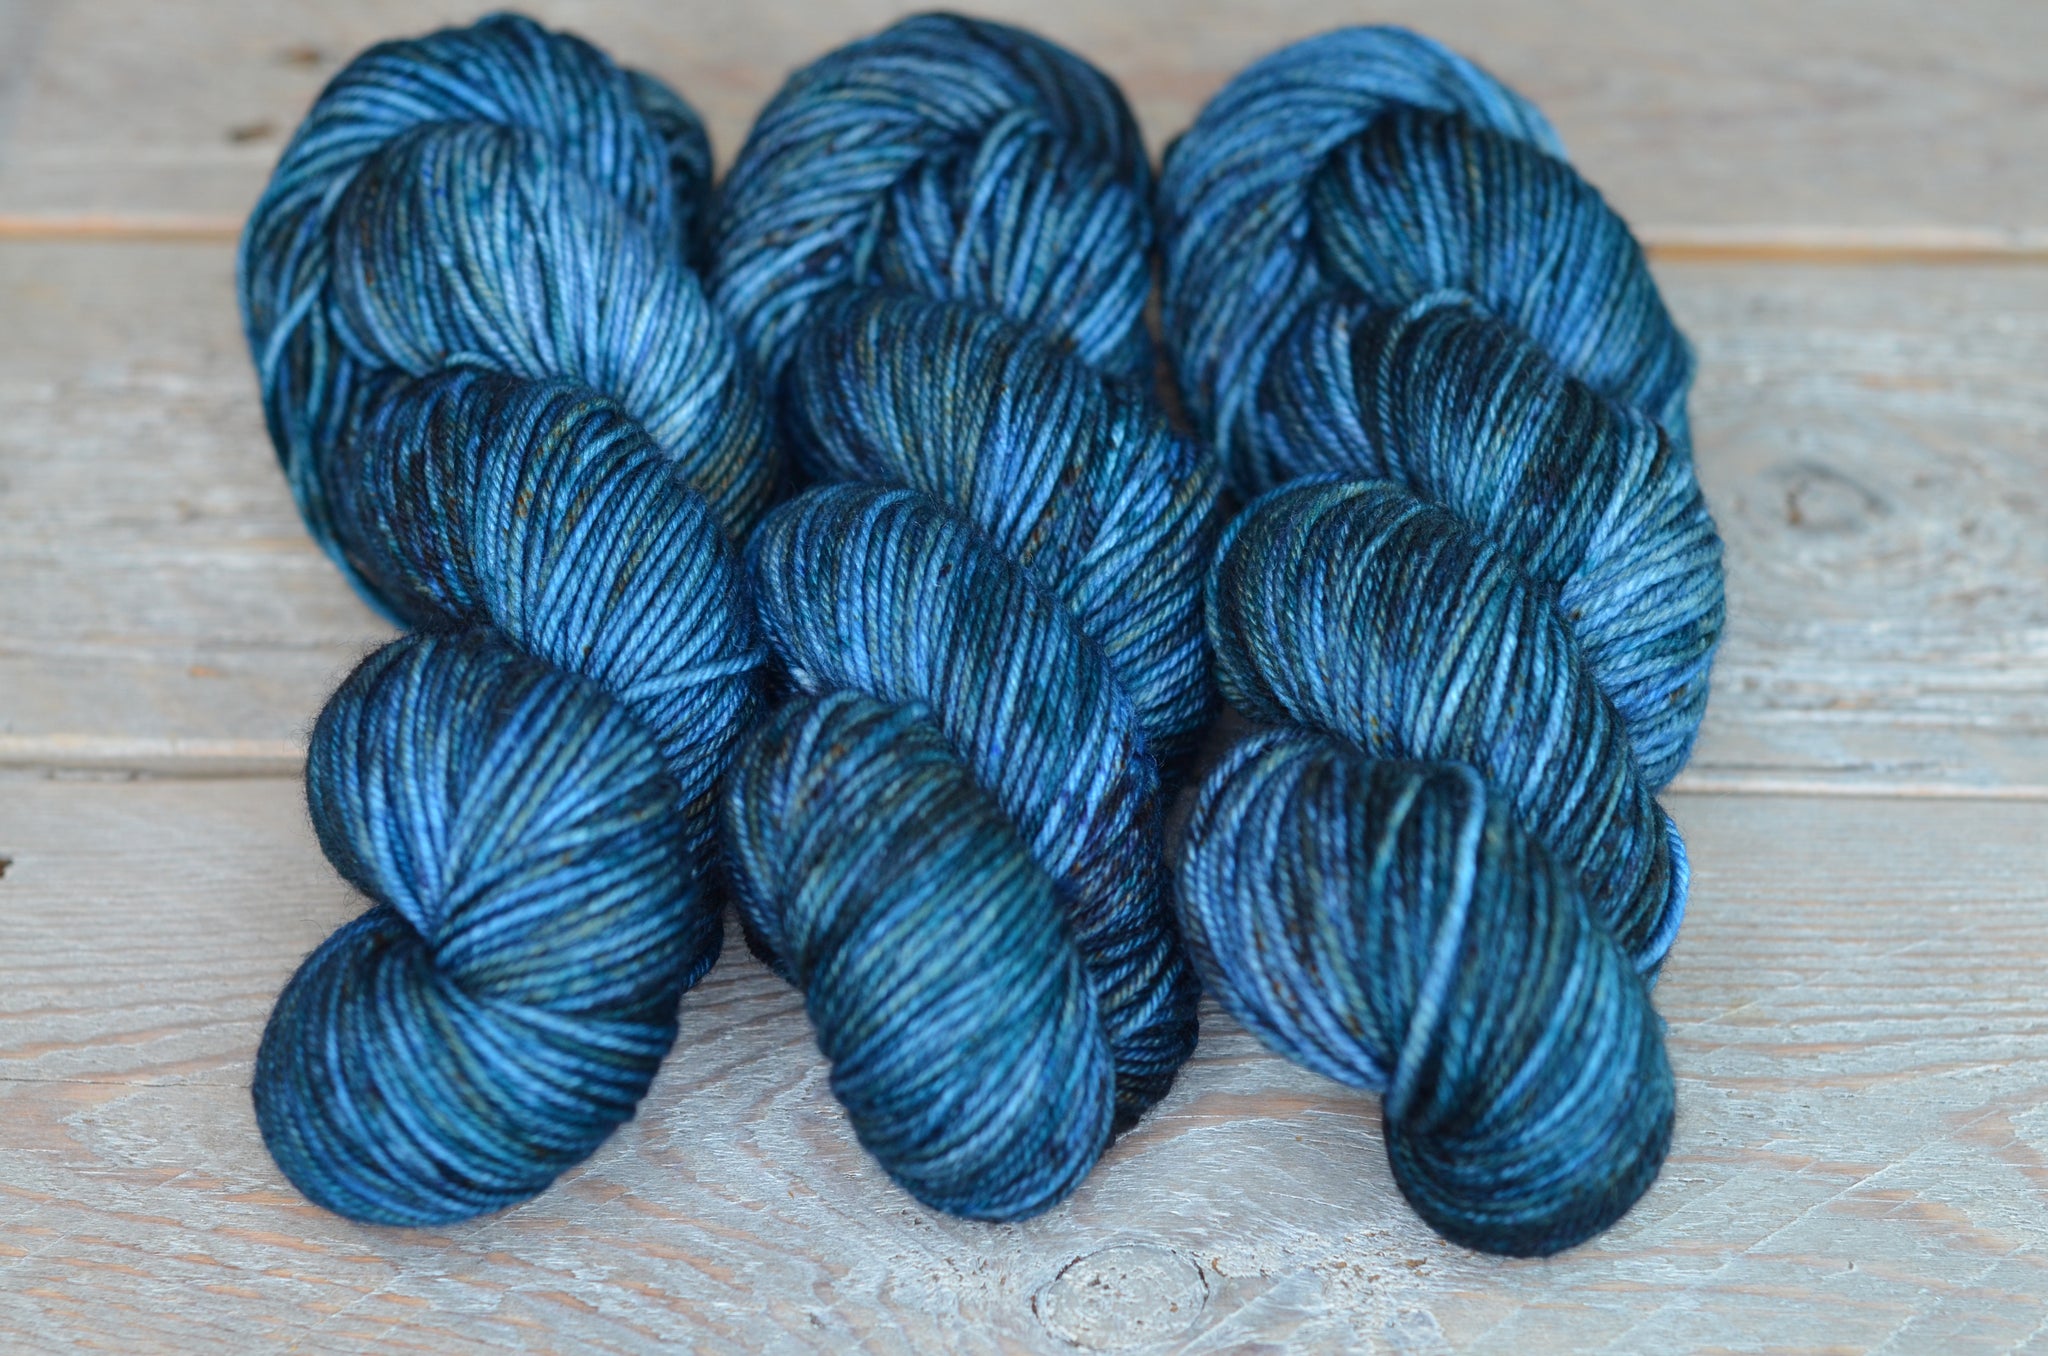 Mid-life Crisis on Classic Worsted